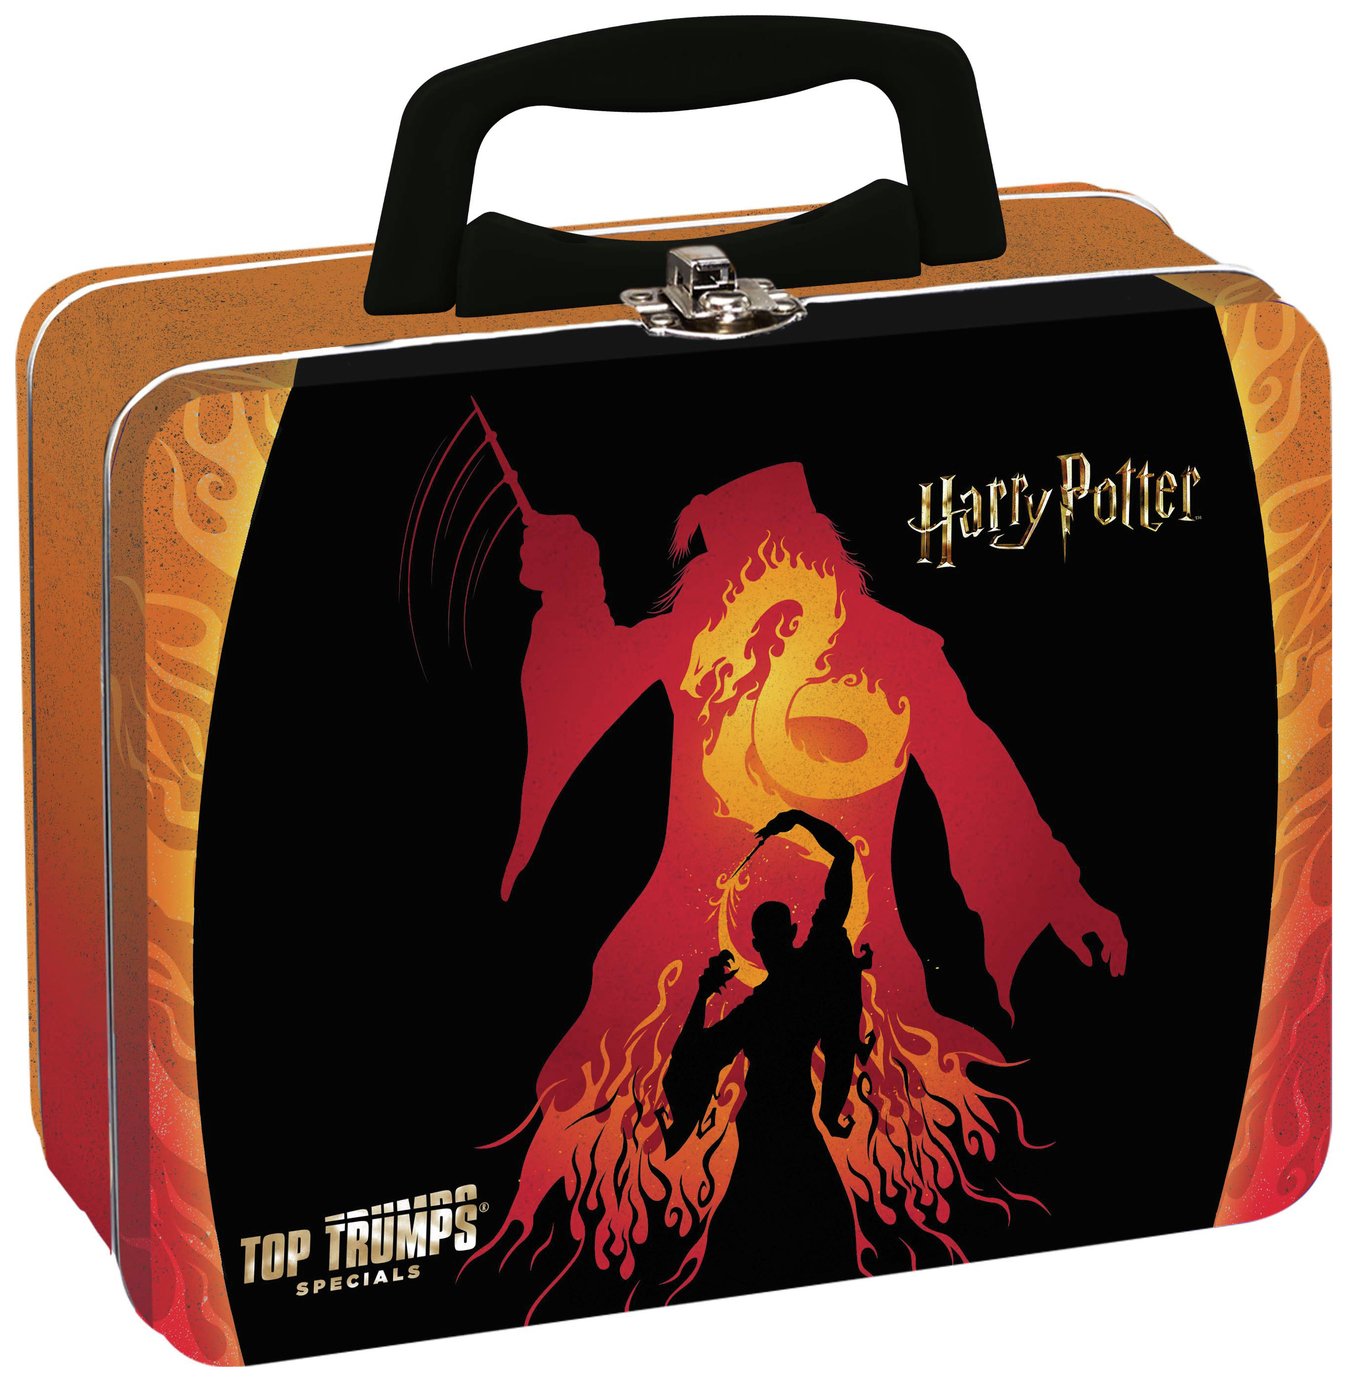 Harry Potter Witches And Wizards Top Trumps Tin Card Game review